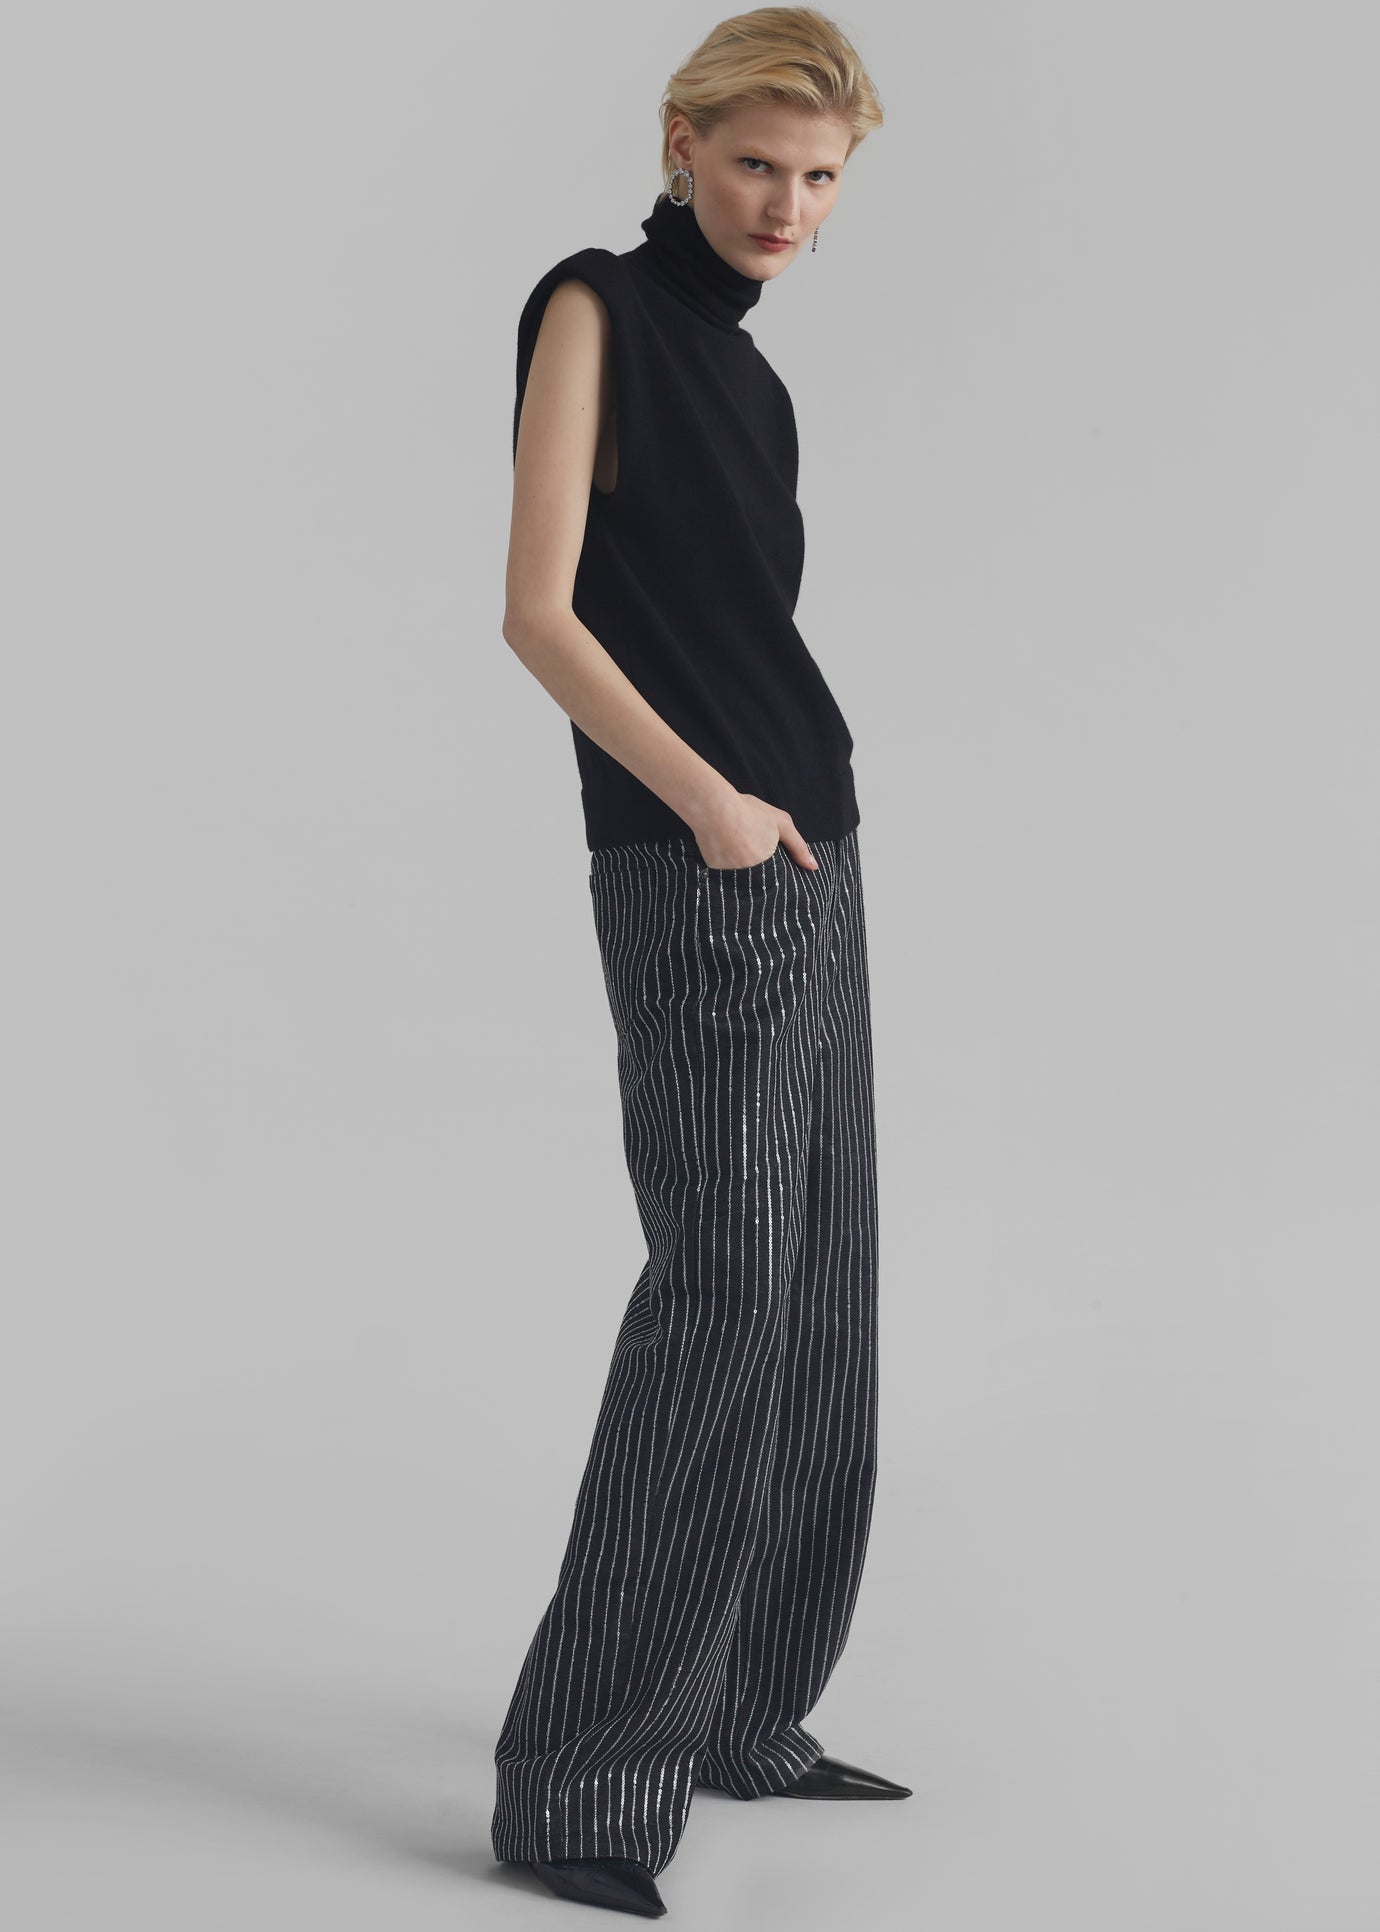 Rotate Sequin Twill Wide Pants - Black